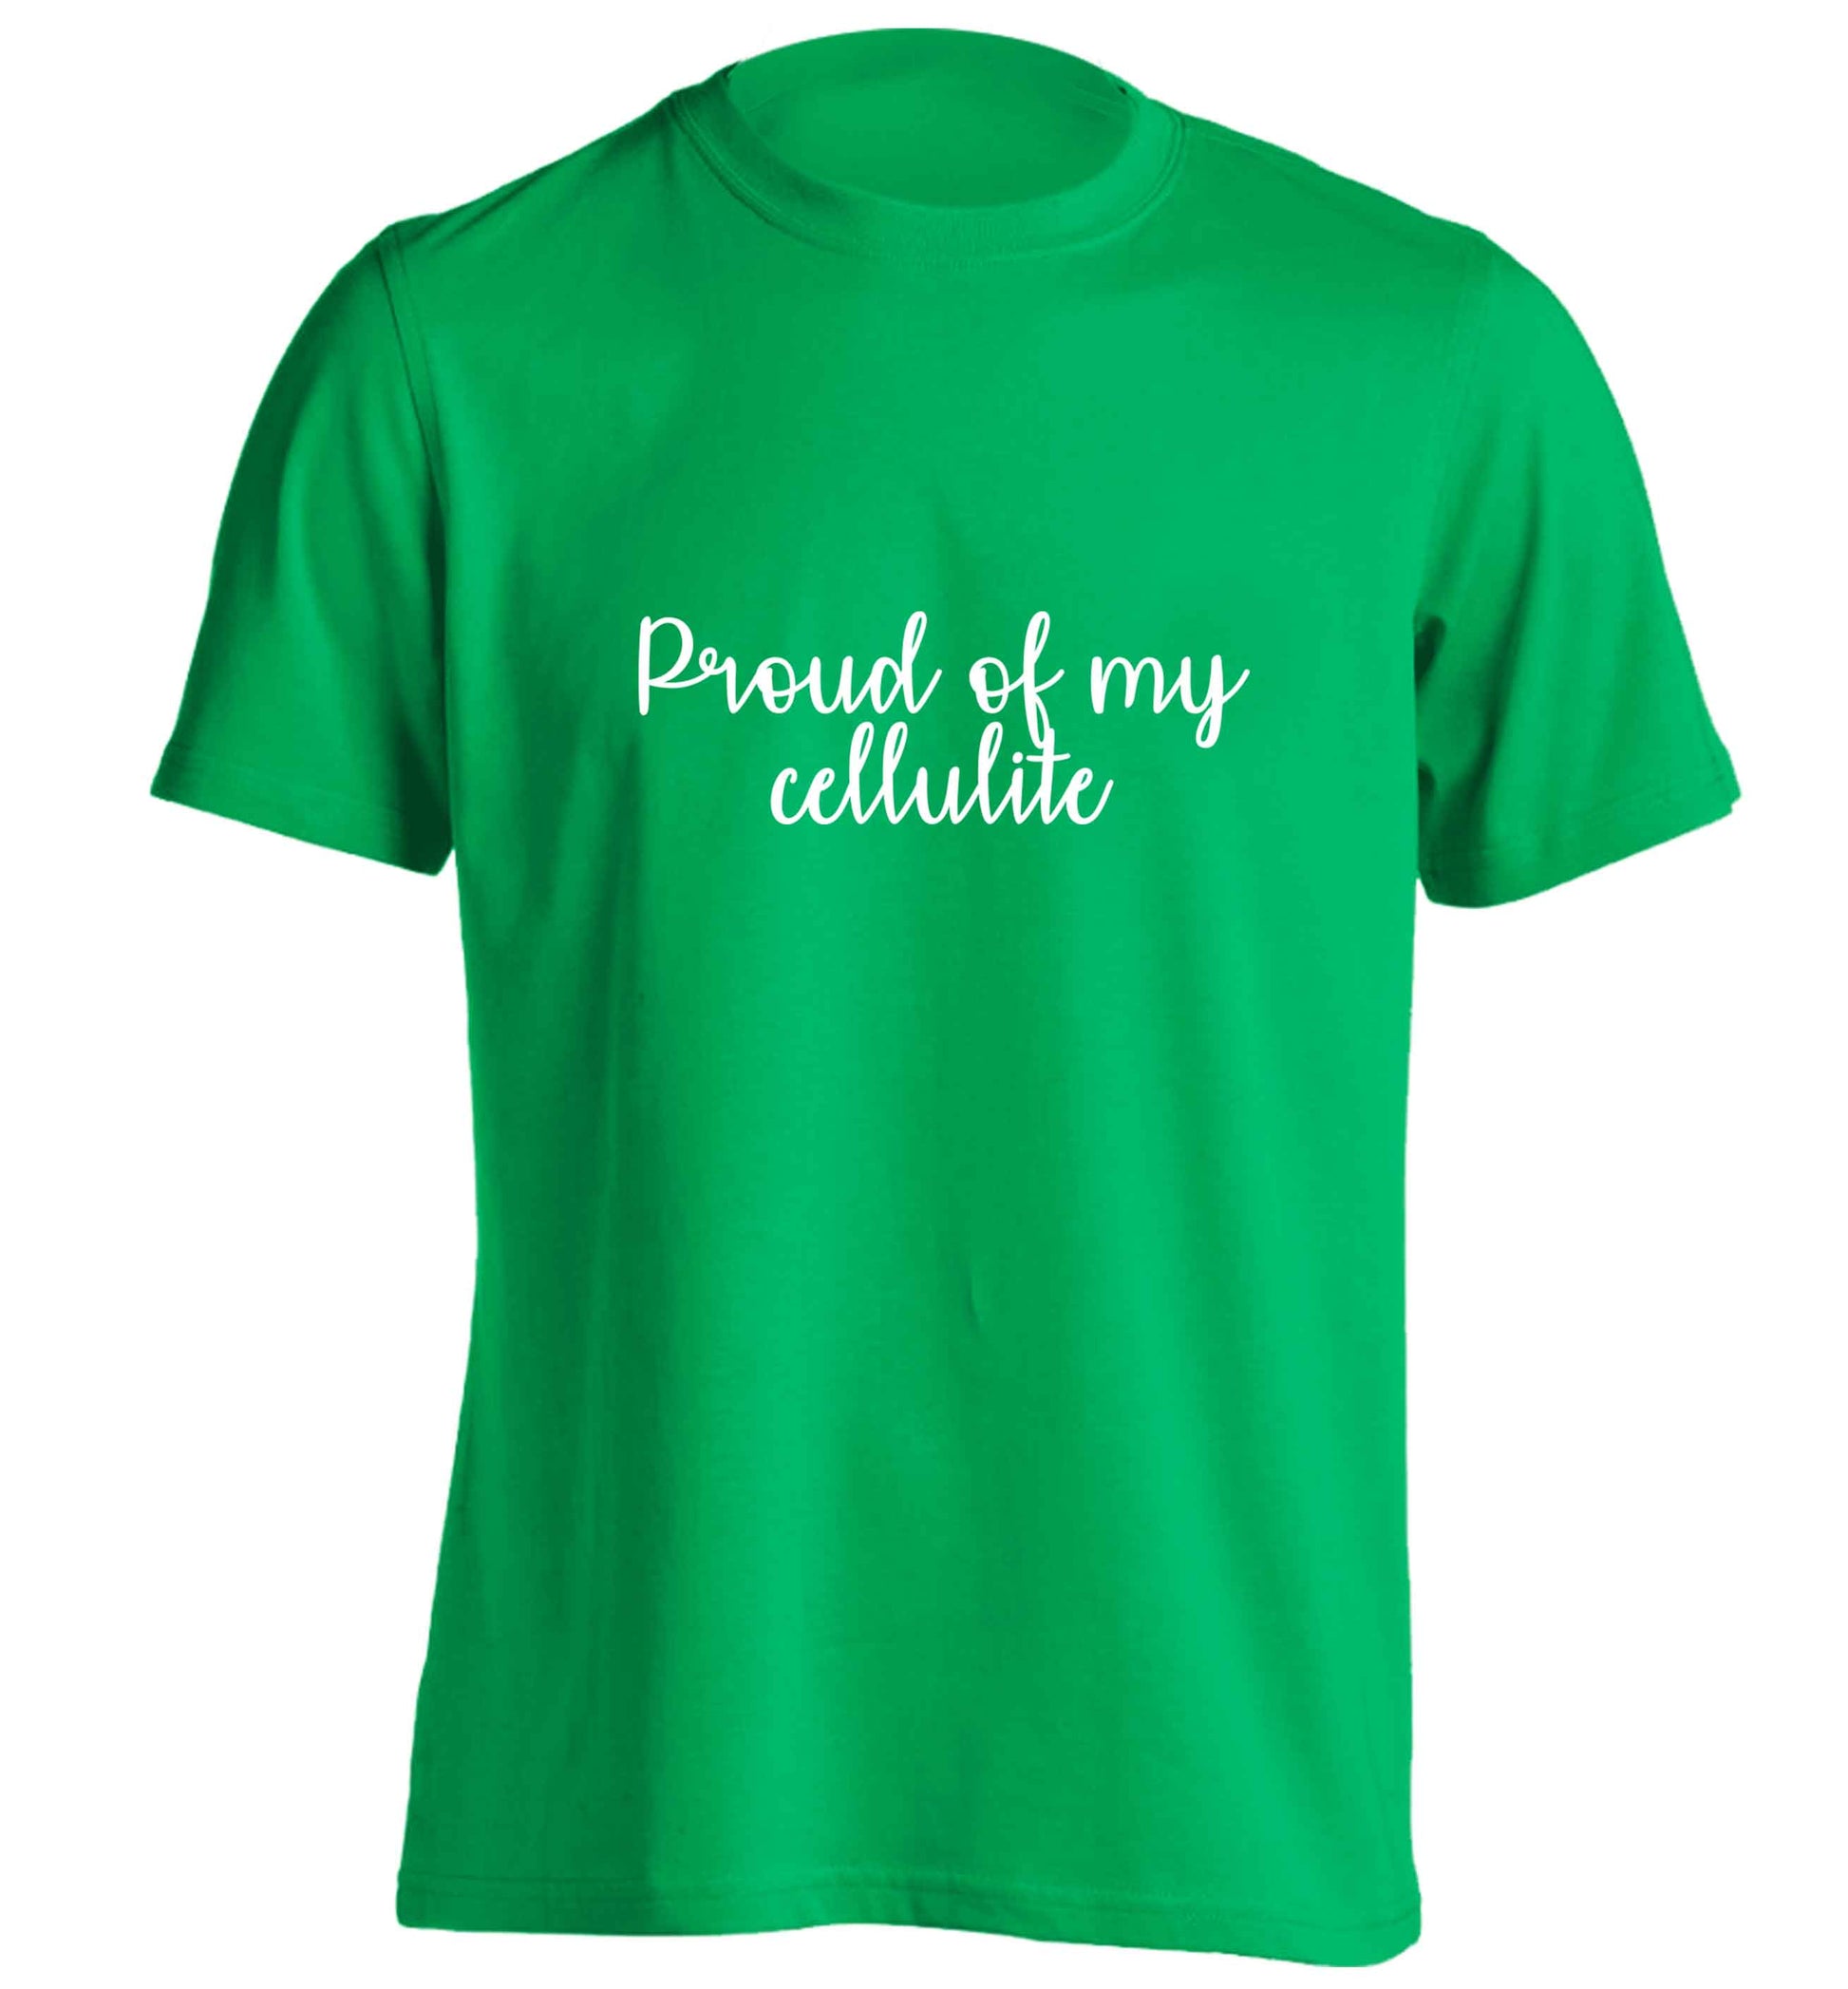 Proud of my cellulite adults unisex green Tshirt 2XL